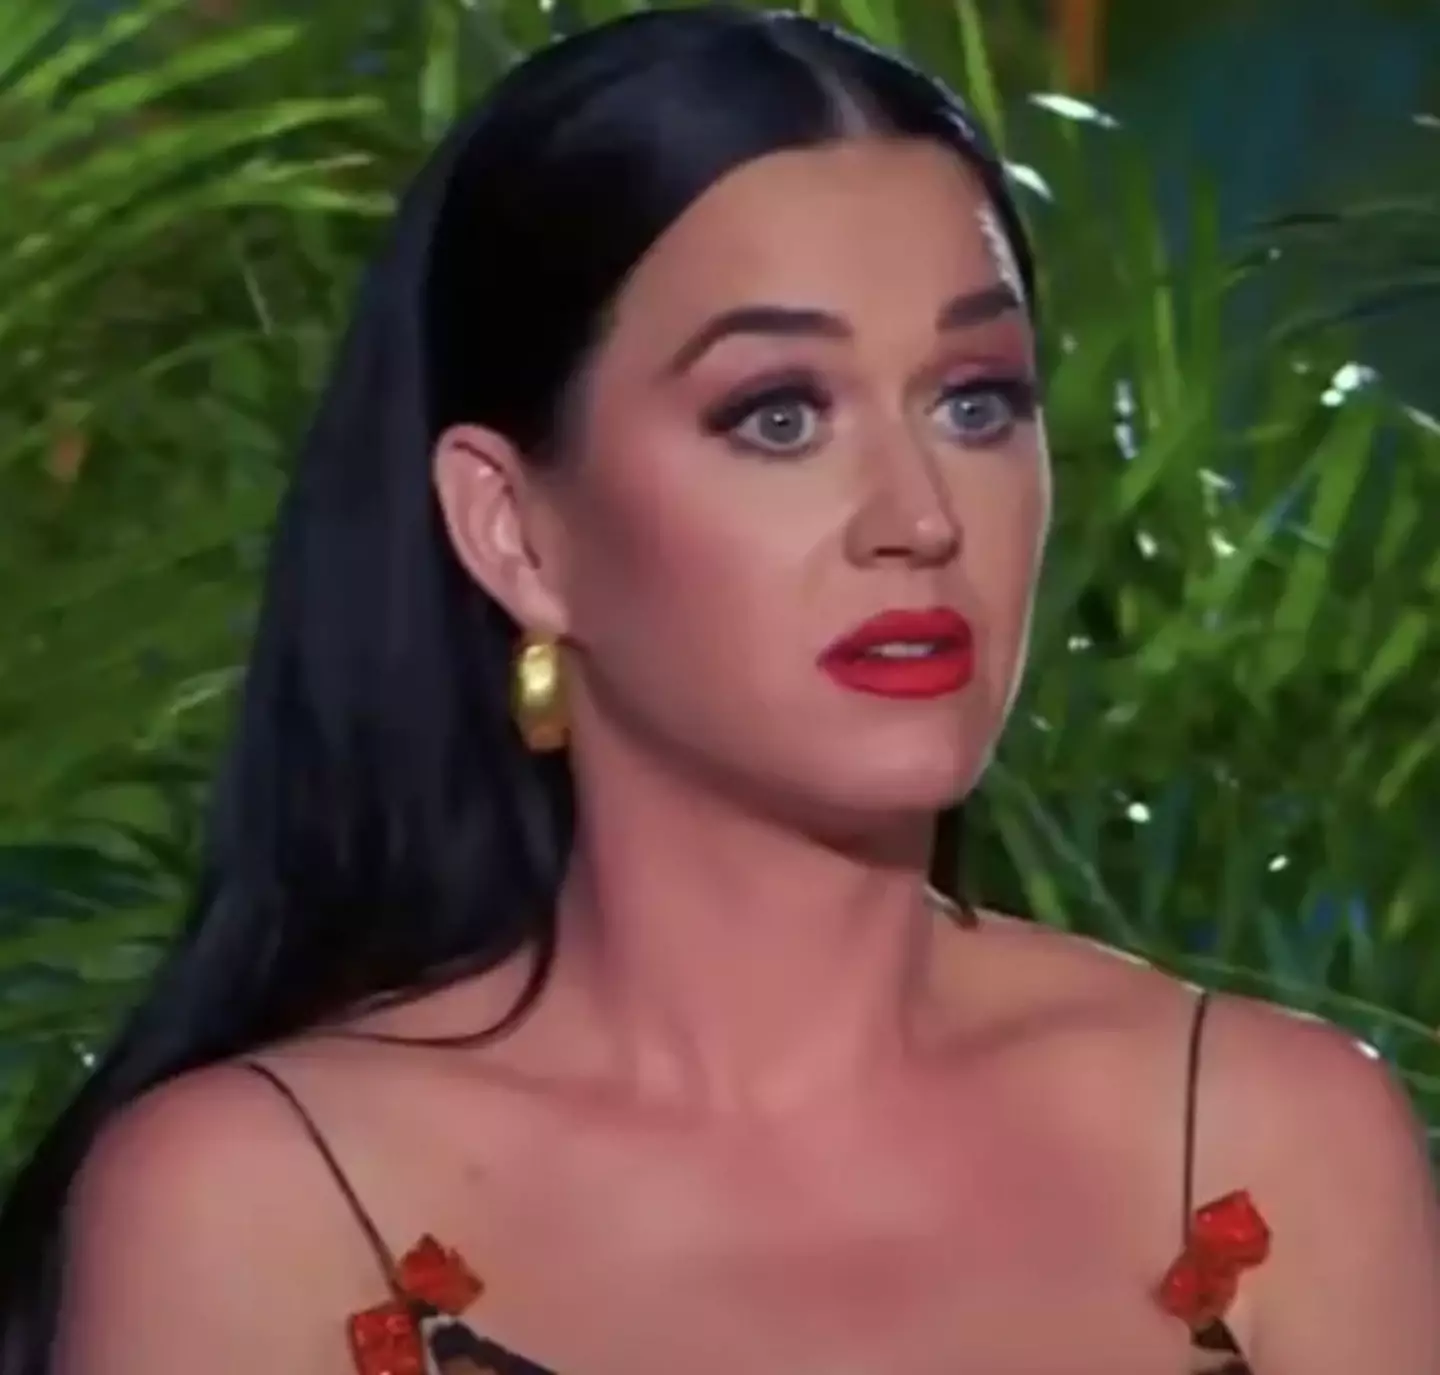 Katy Perry was booed by the audience.